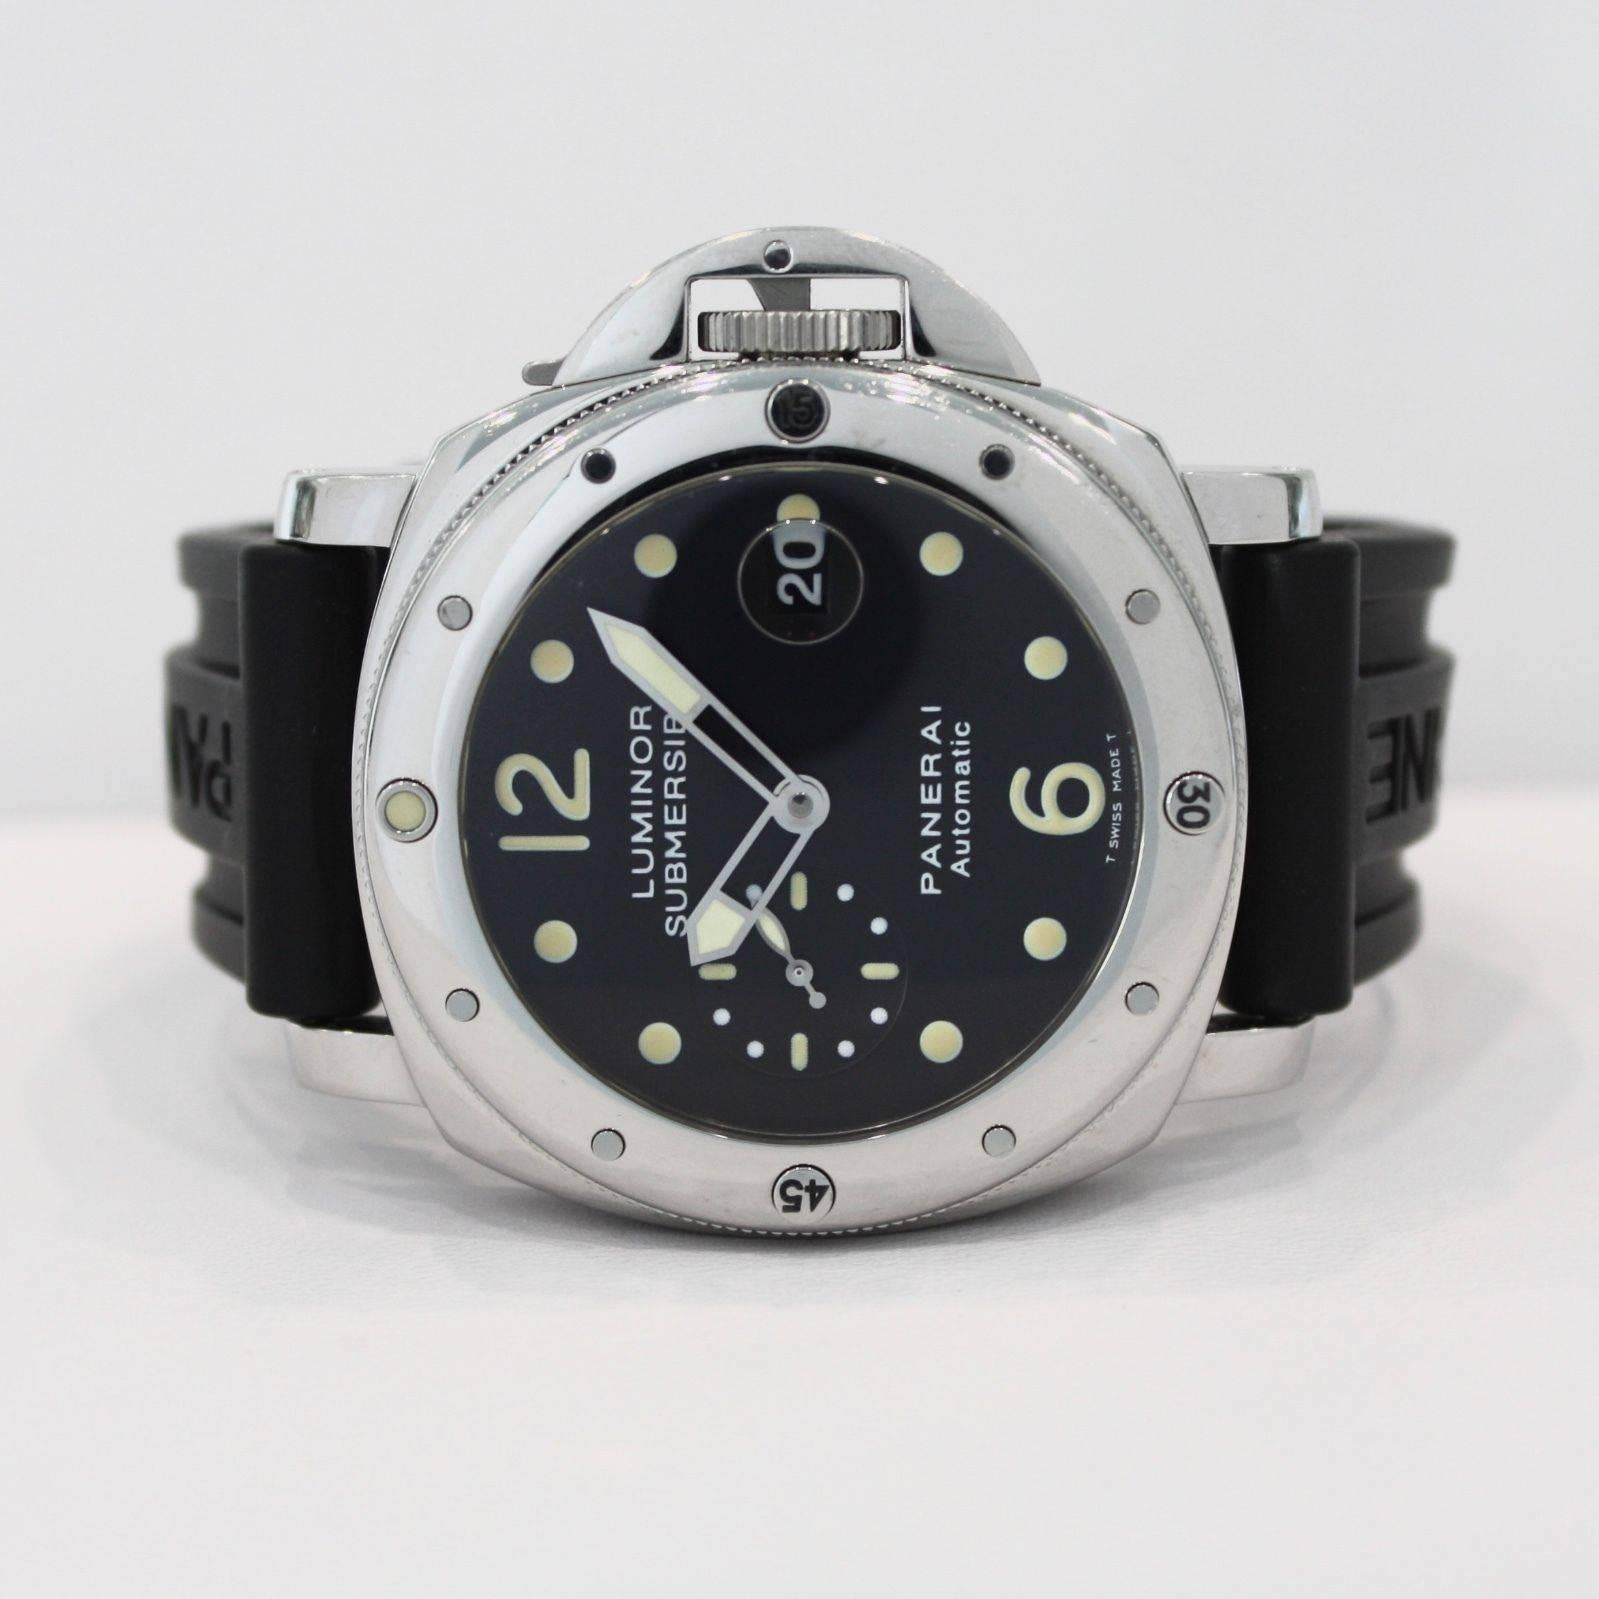 Brand Name	Panerai
Style Number	PAM00024
Also Called	PAM 24 C 
Series	Luminor Submersible 